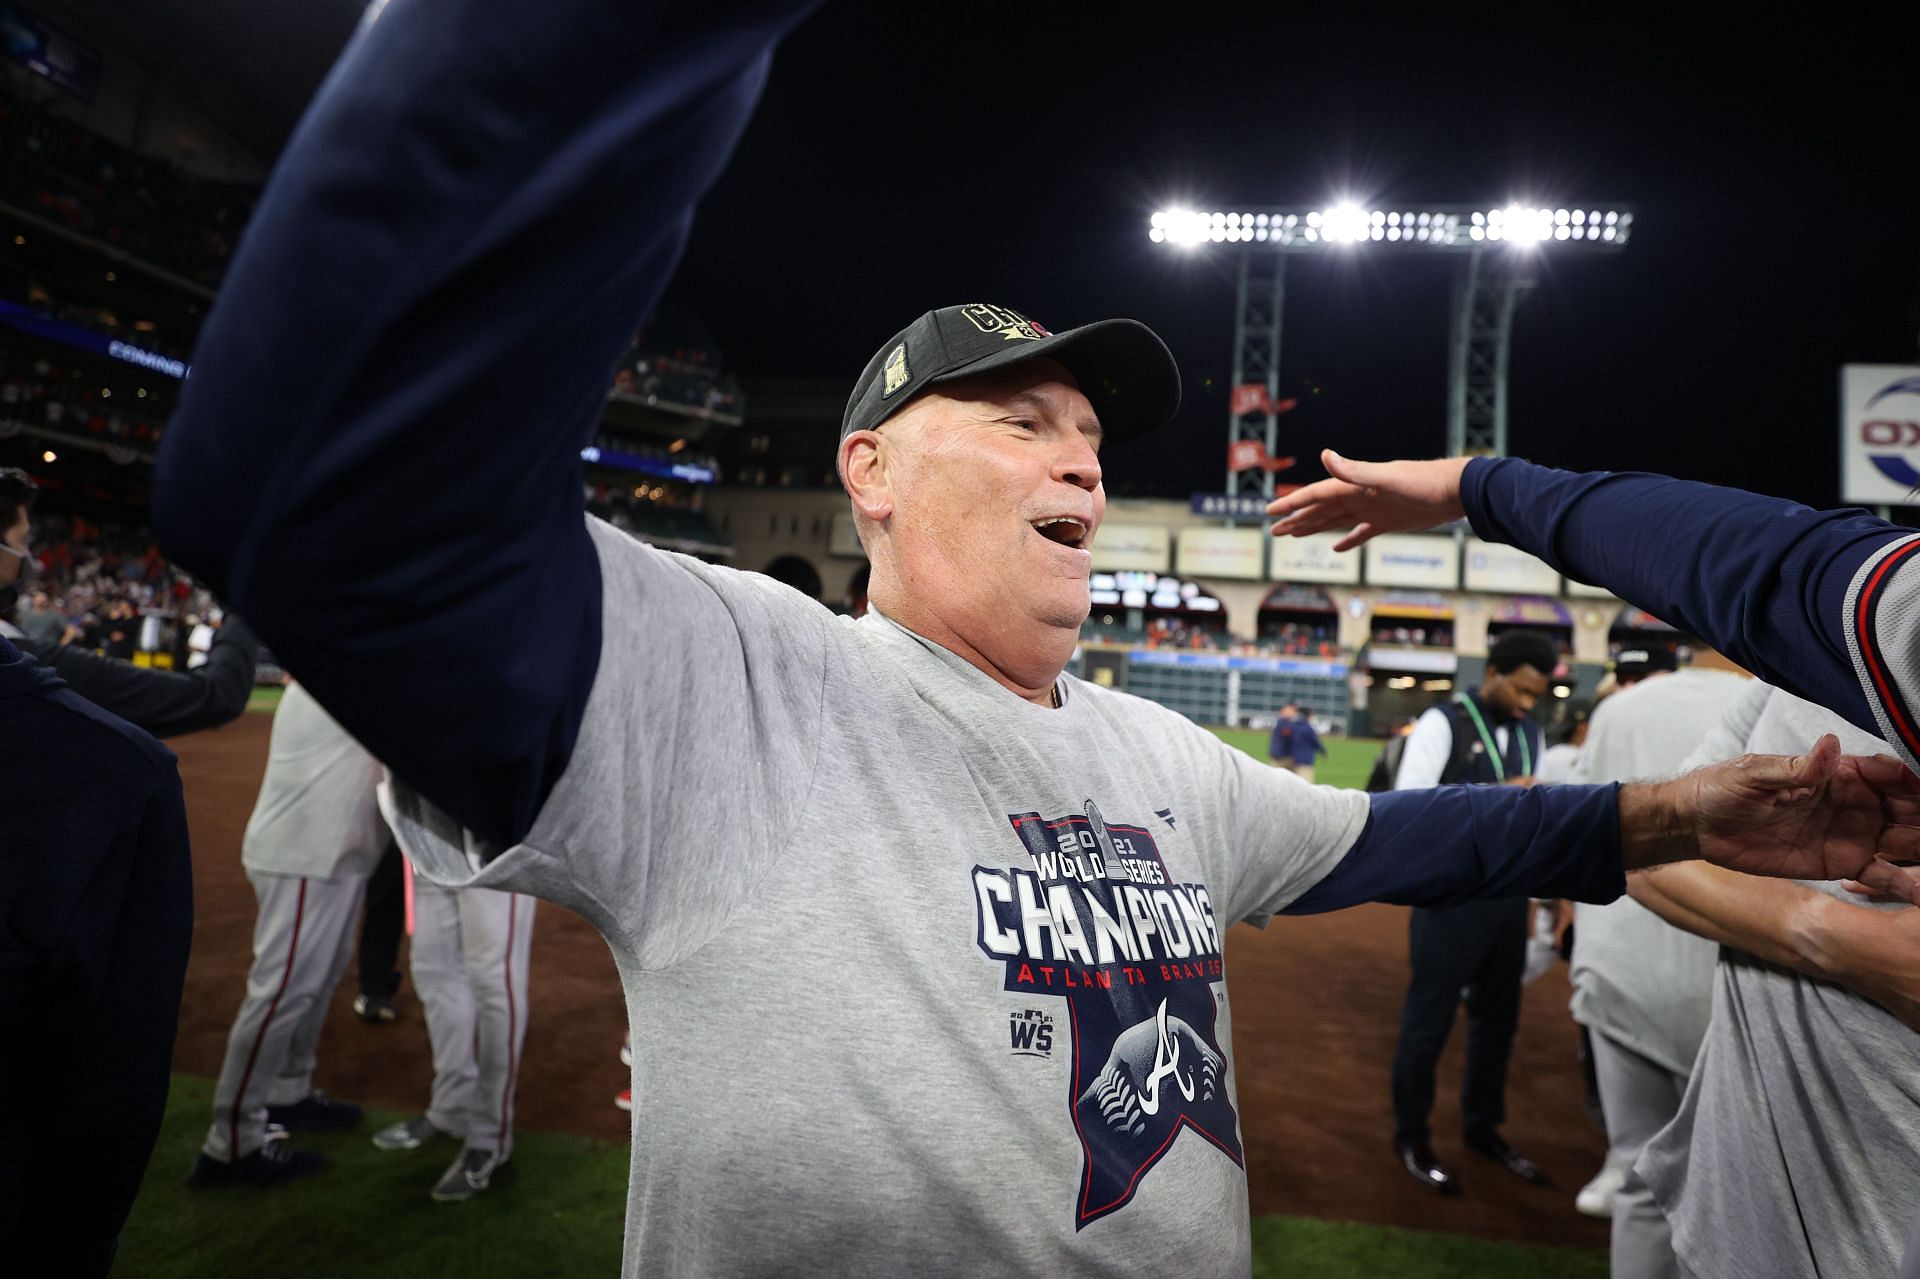 Manager Brian Snitker celebrates winning the 2021 World Series at Minute Maid Park